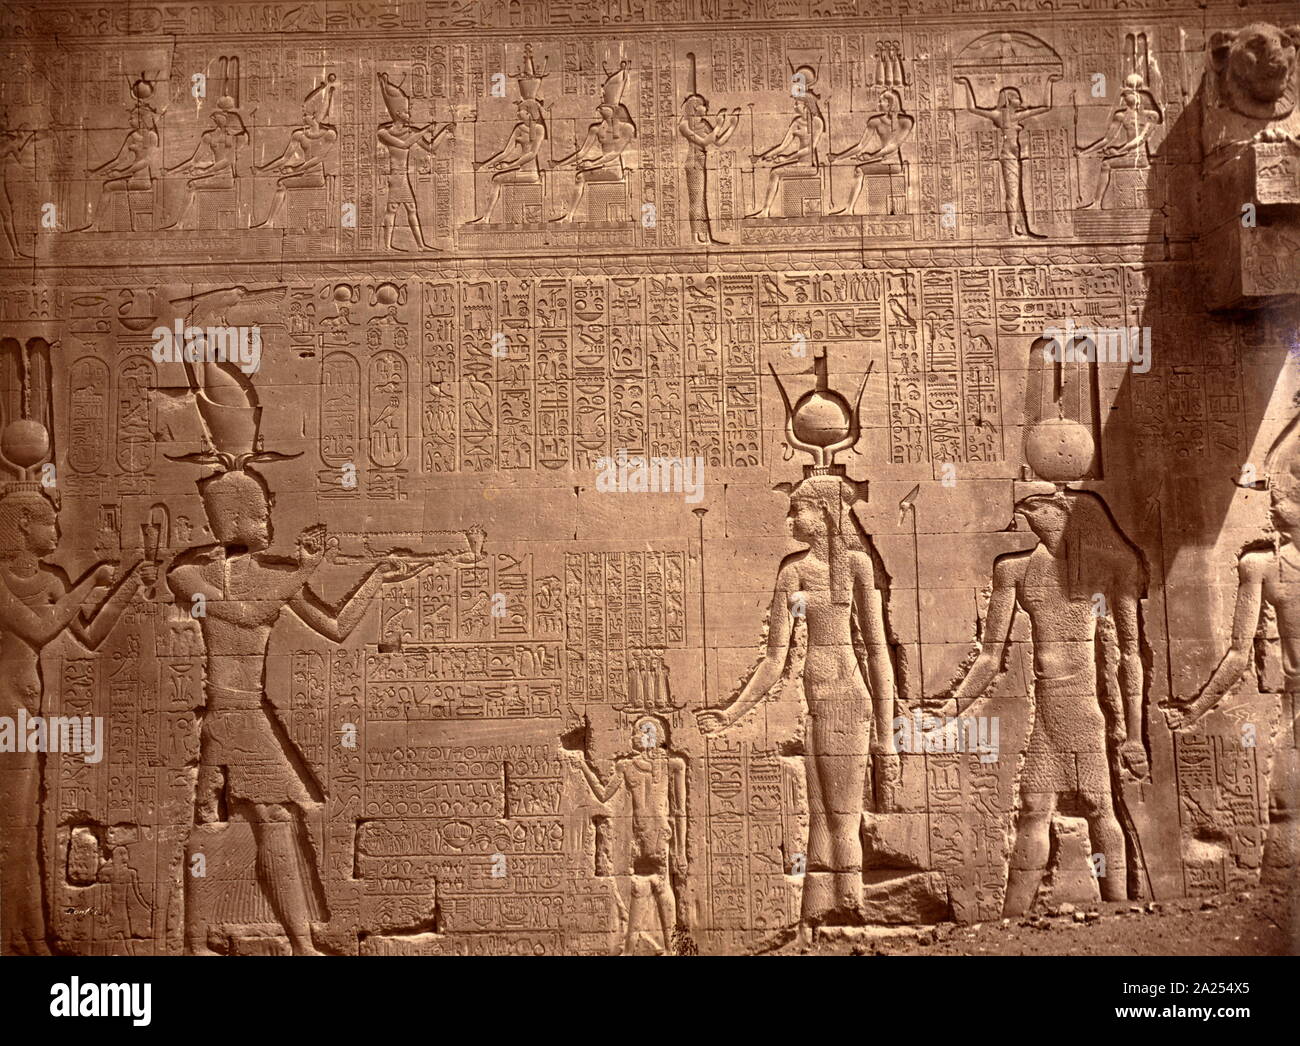 relief with hieroglyphics covers a wall in the Temple of Hathor, located in Dendera, Egypt. Dendera Temple complex. It is one of the best-preserved temple complexes in Egypt. The area was used as the sixth Nome of Upper Egypt, south of Abydos. Stock Photo